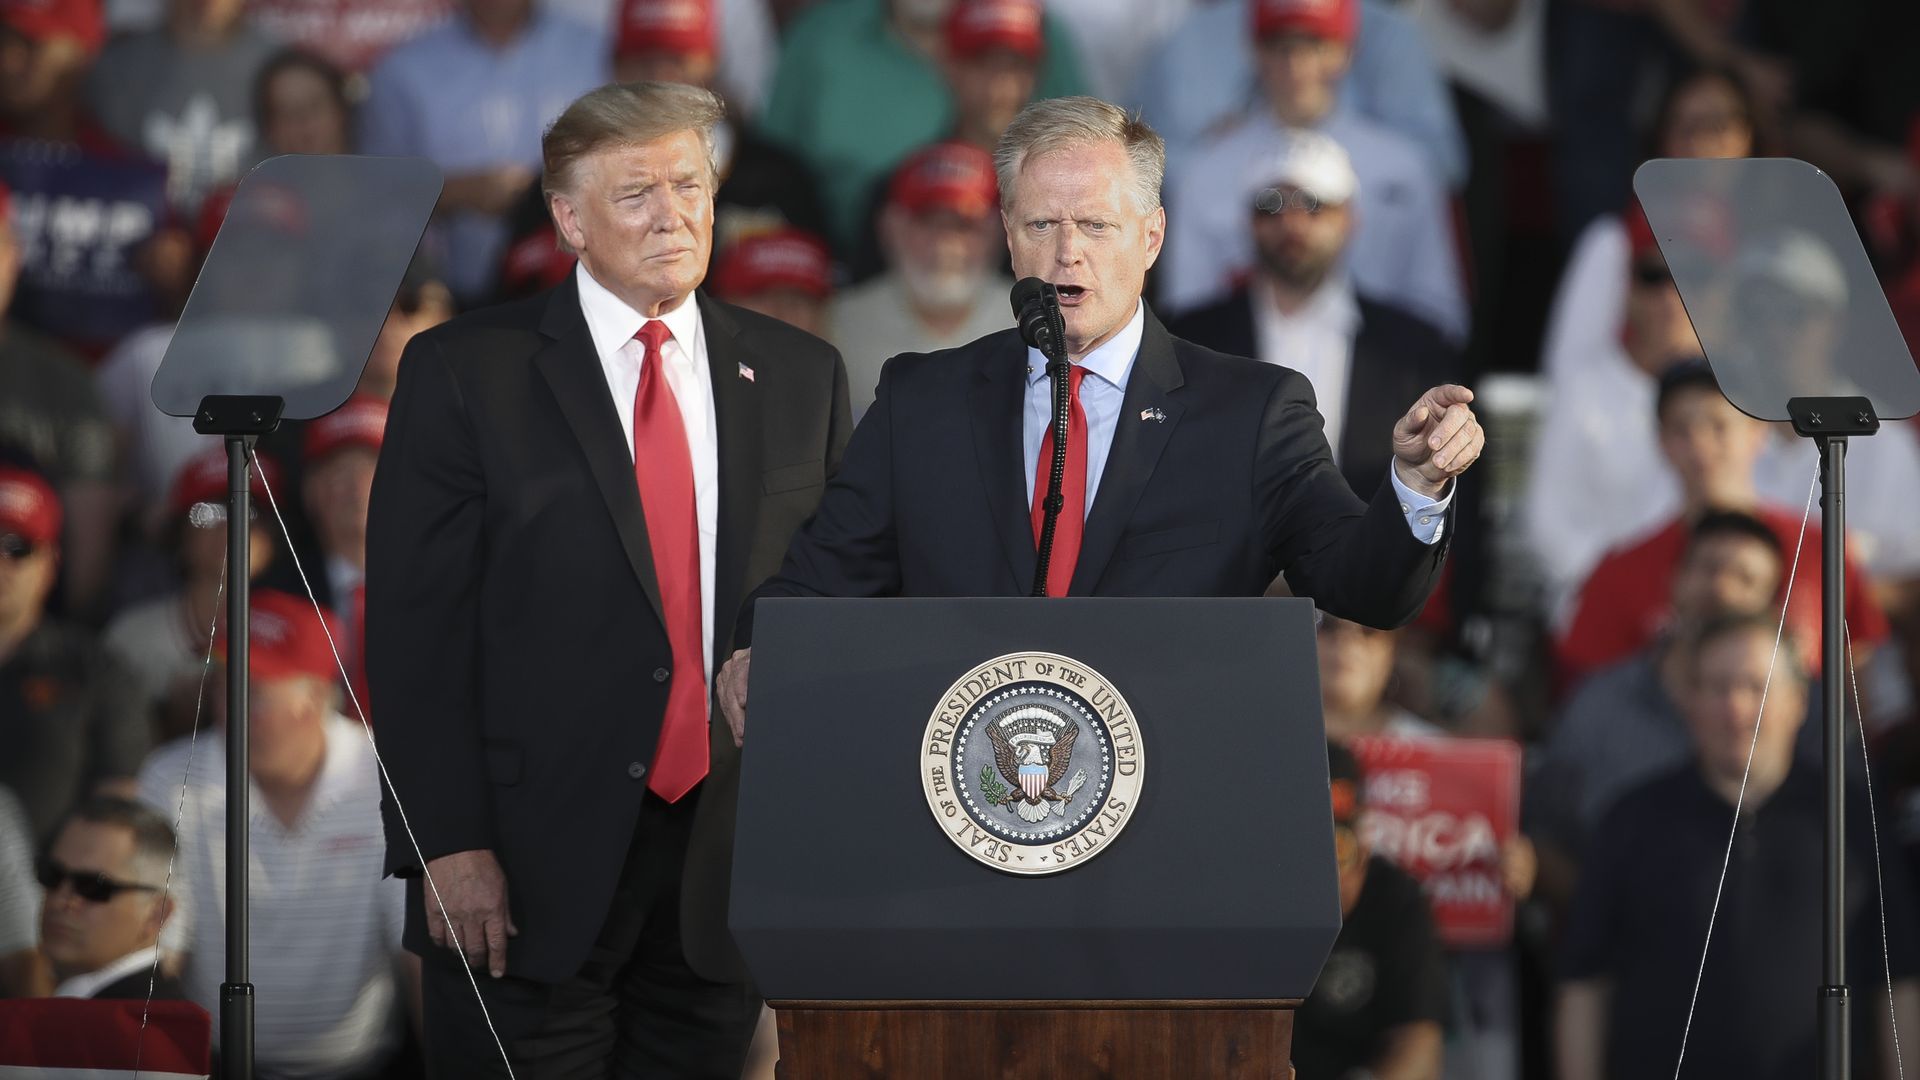 President Trump and Fred Keller, Republican candidate for Congress in Pennsylvania's 12th Congressional district.